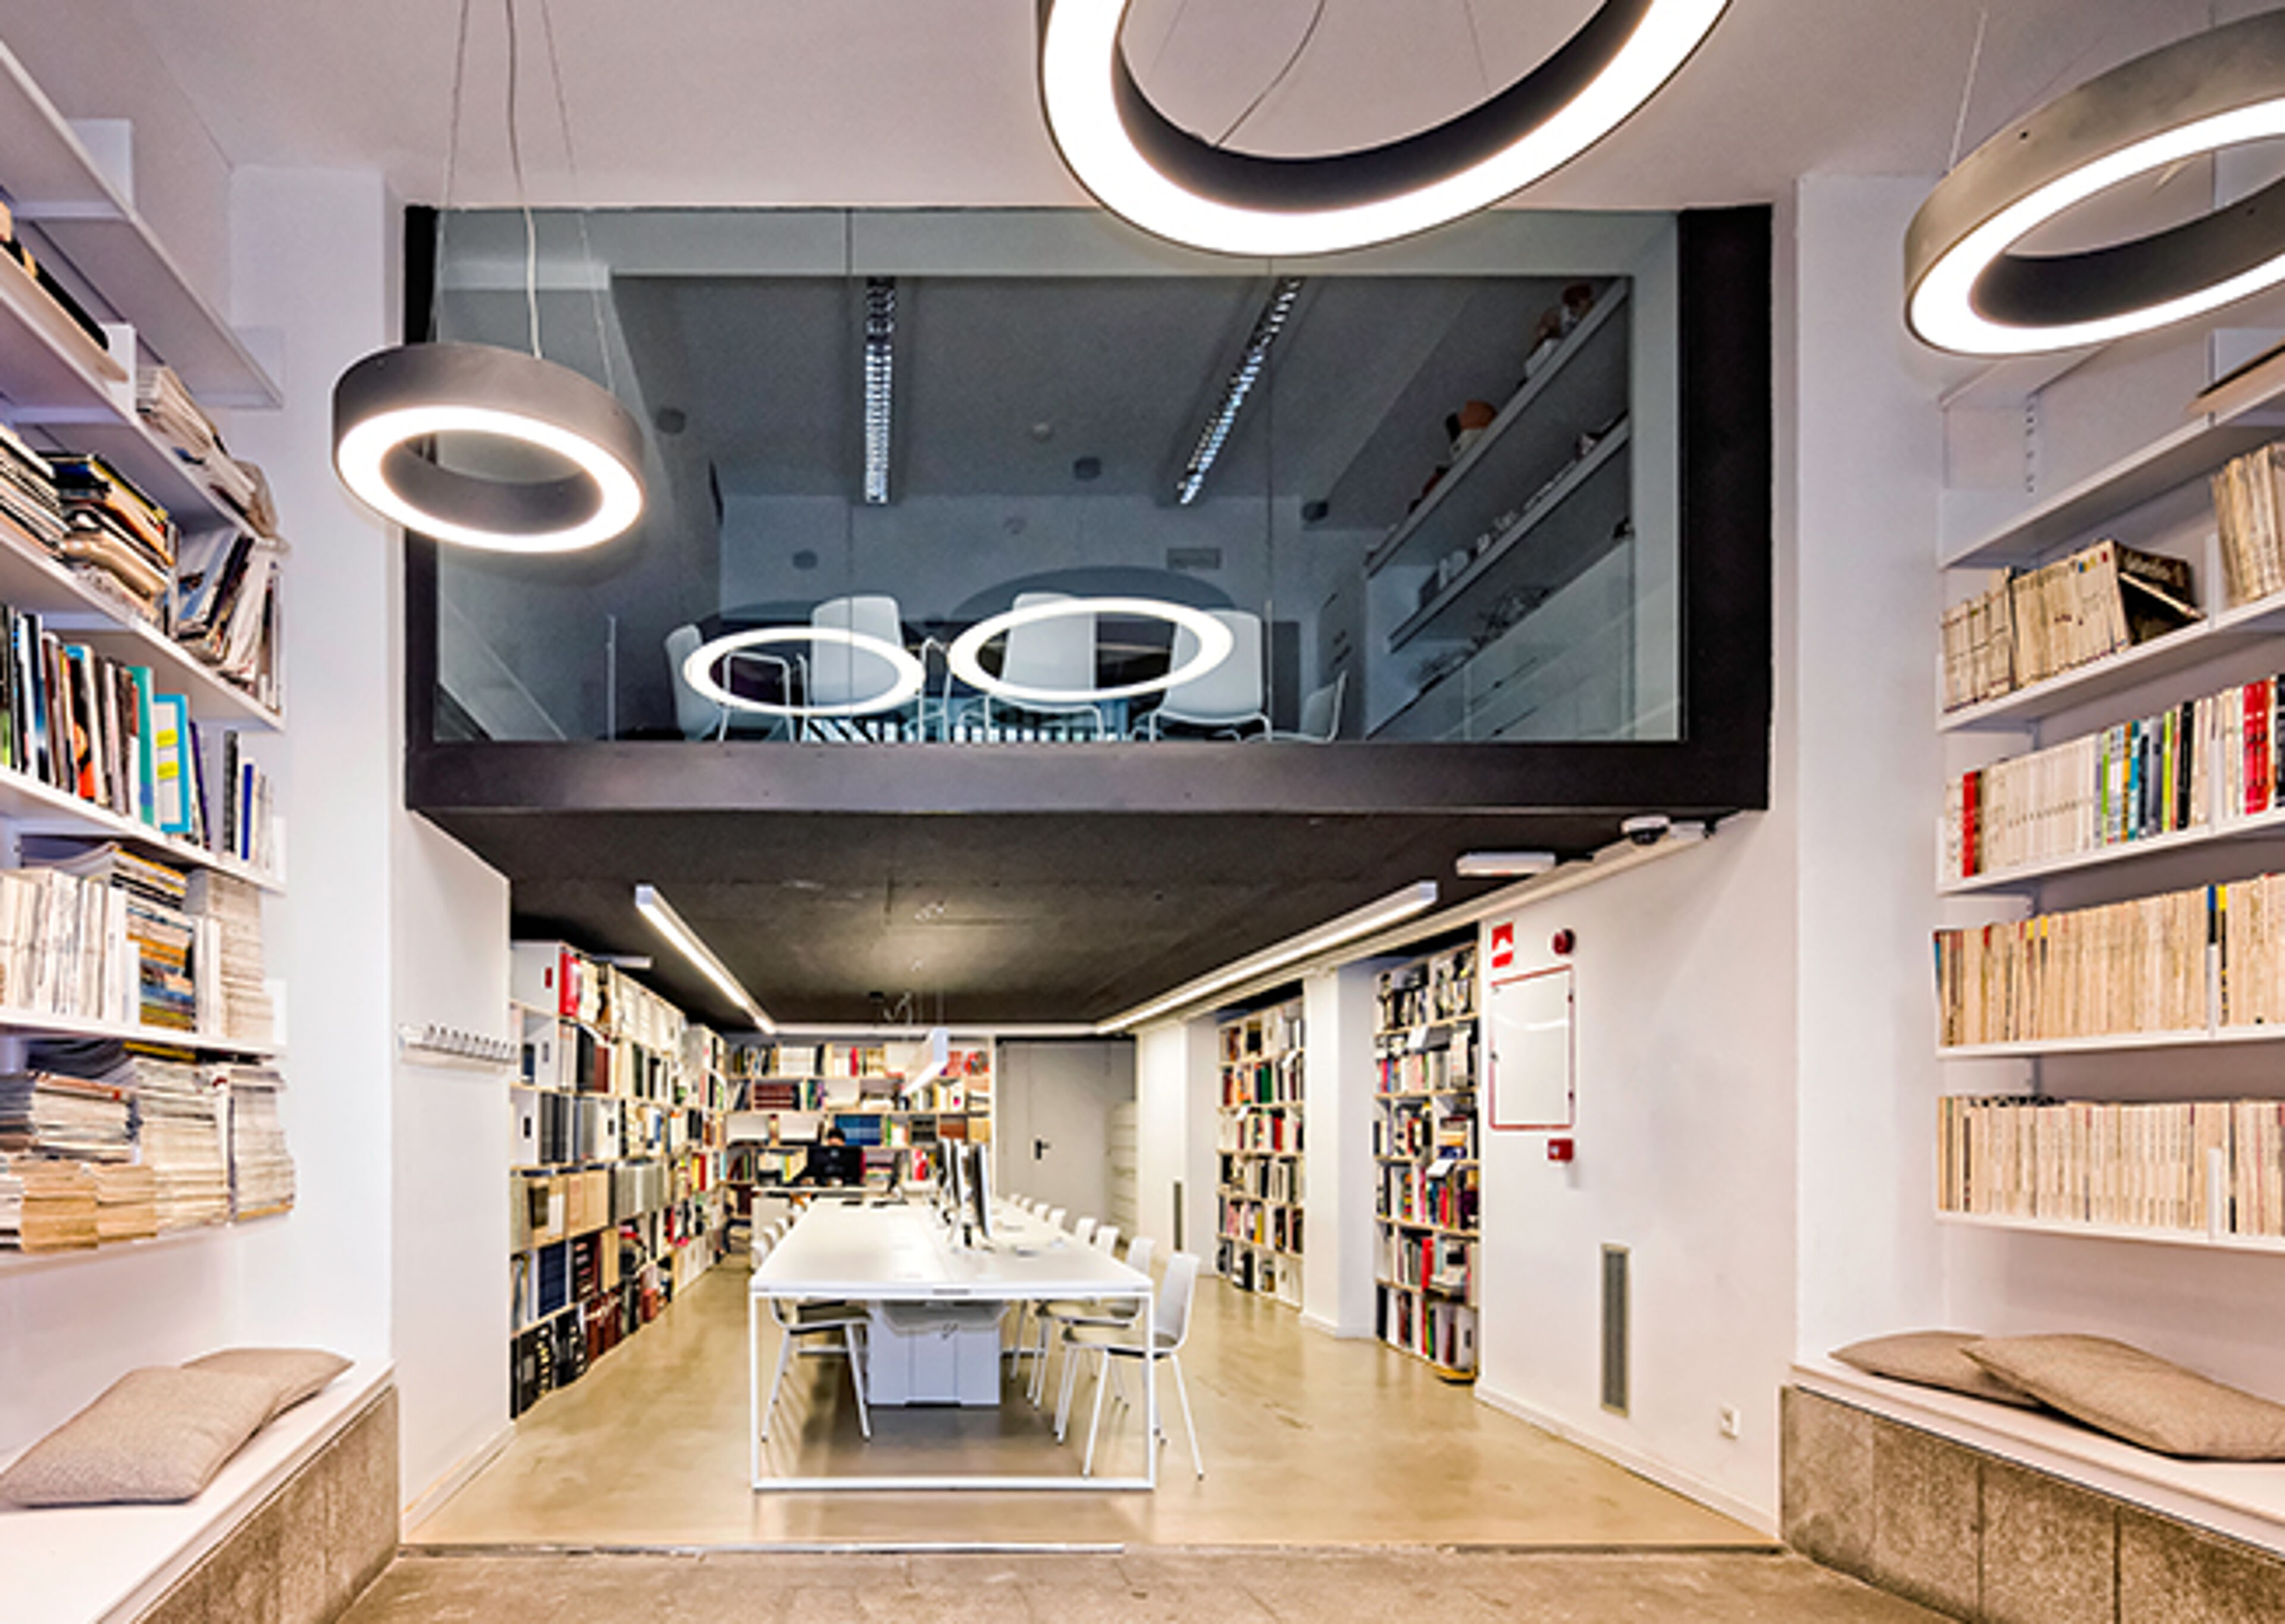 A contemporary library space with circular lighting fixtures, a central communal table, and wall-to-wall bookshelves.